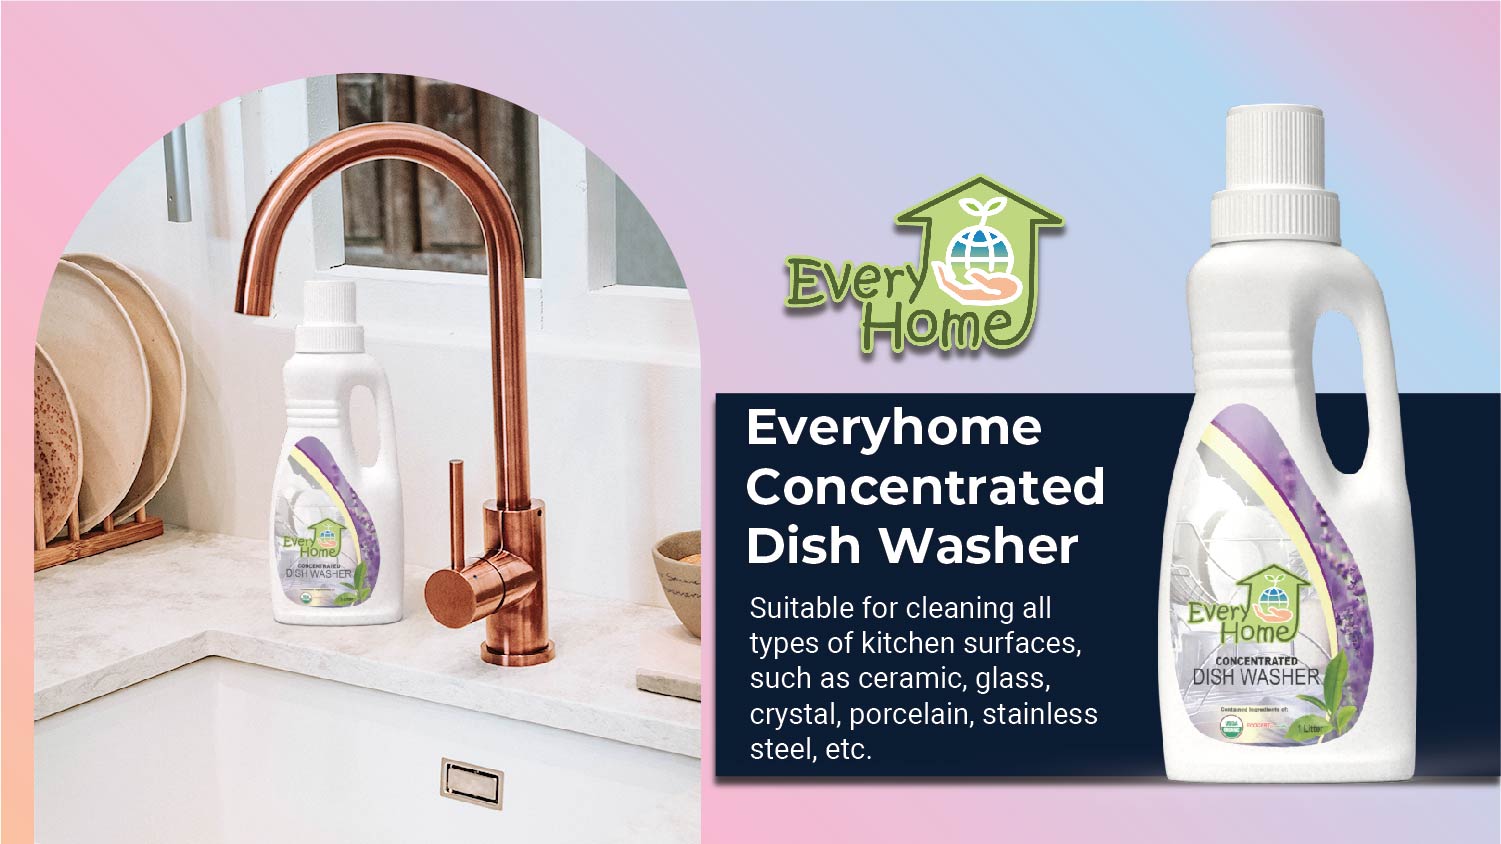 everyhome product details